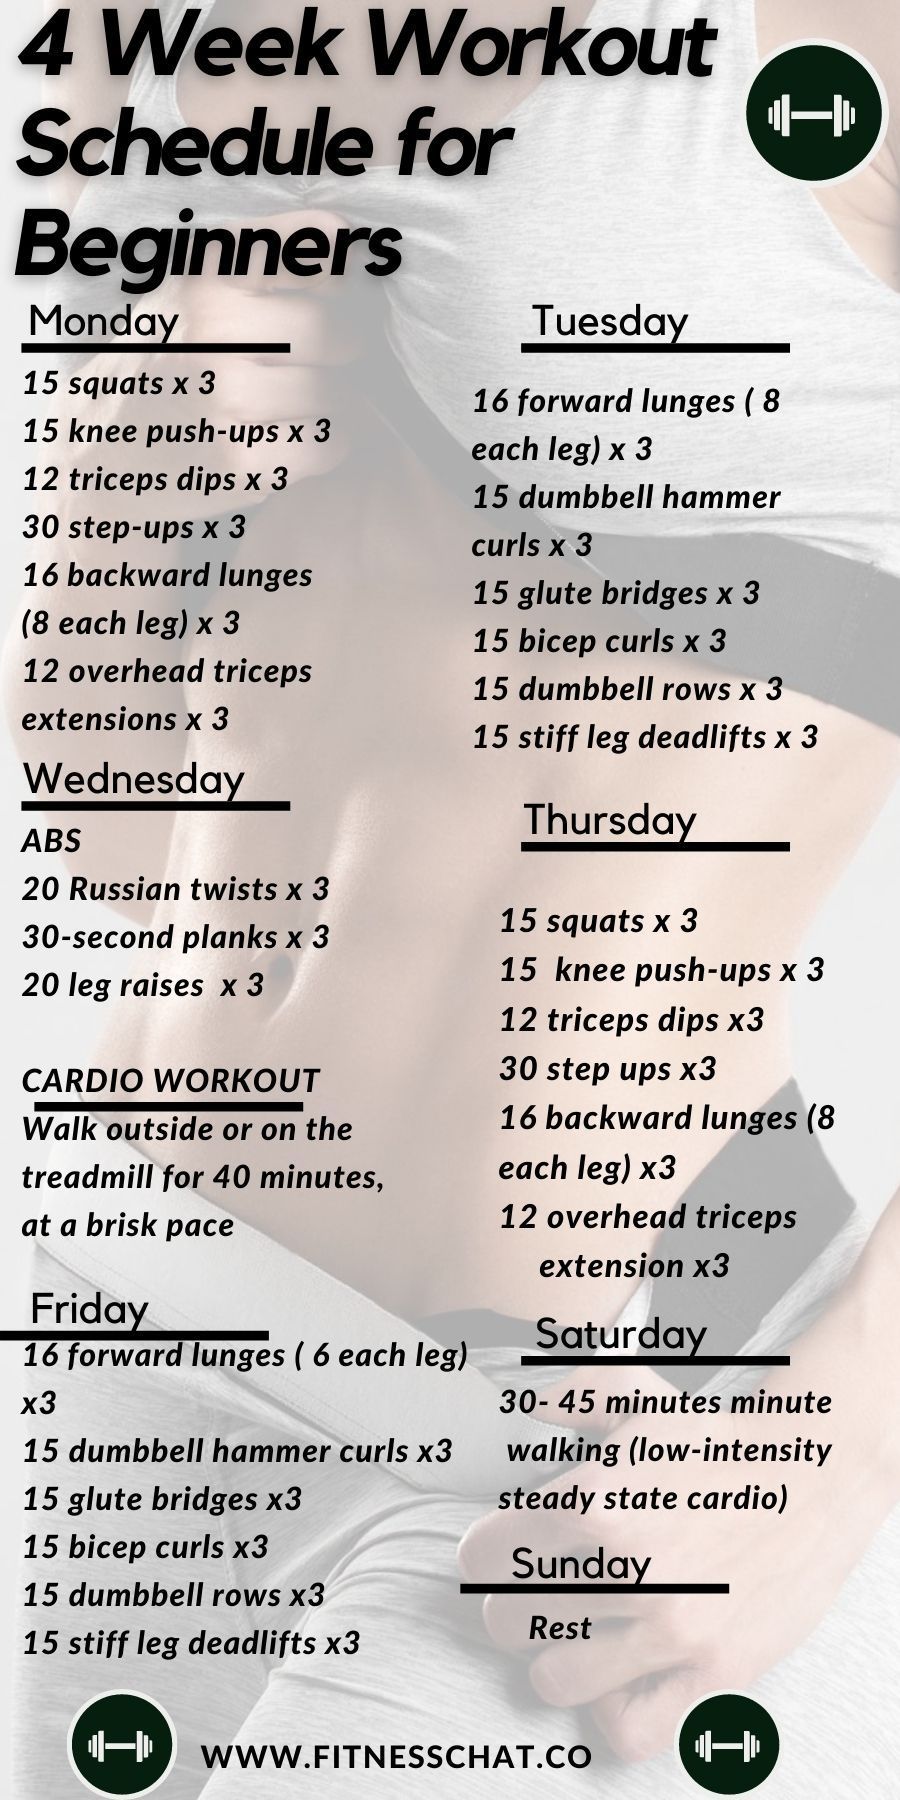 18 workouts at home for beginners ideas